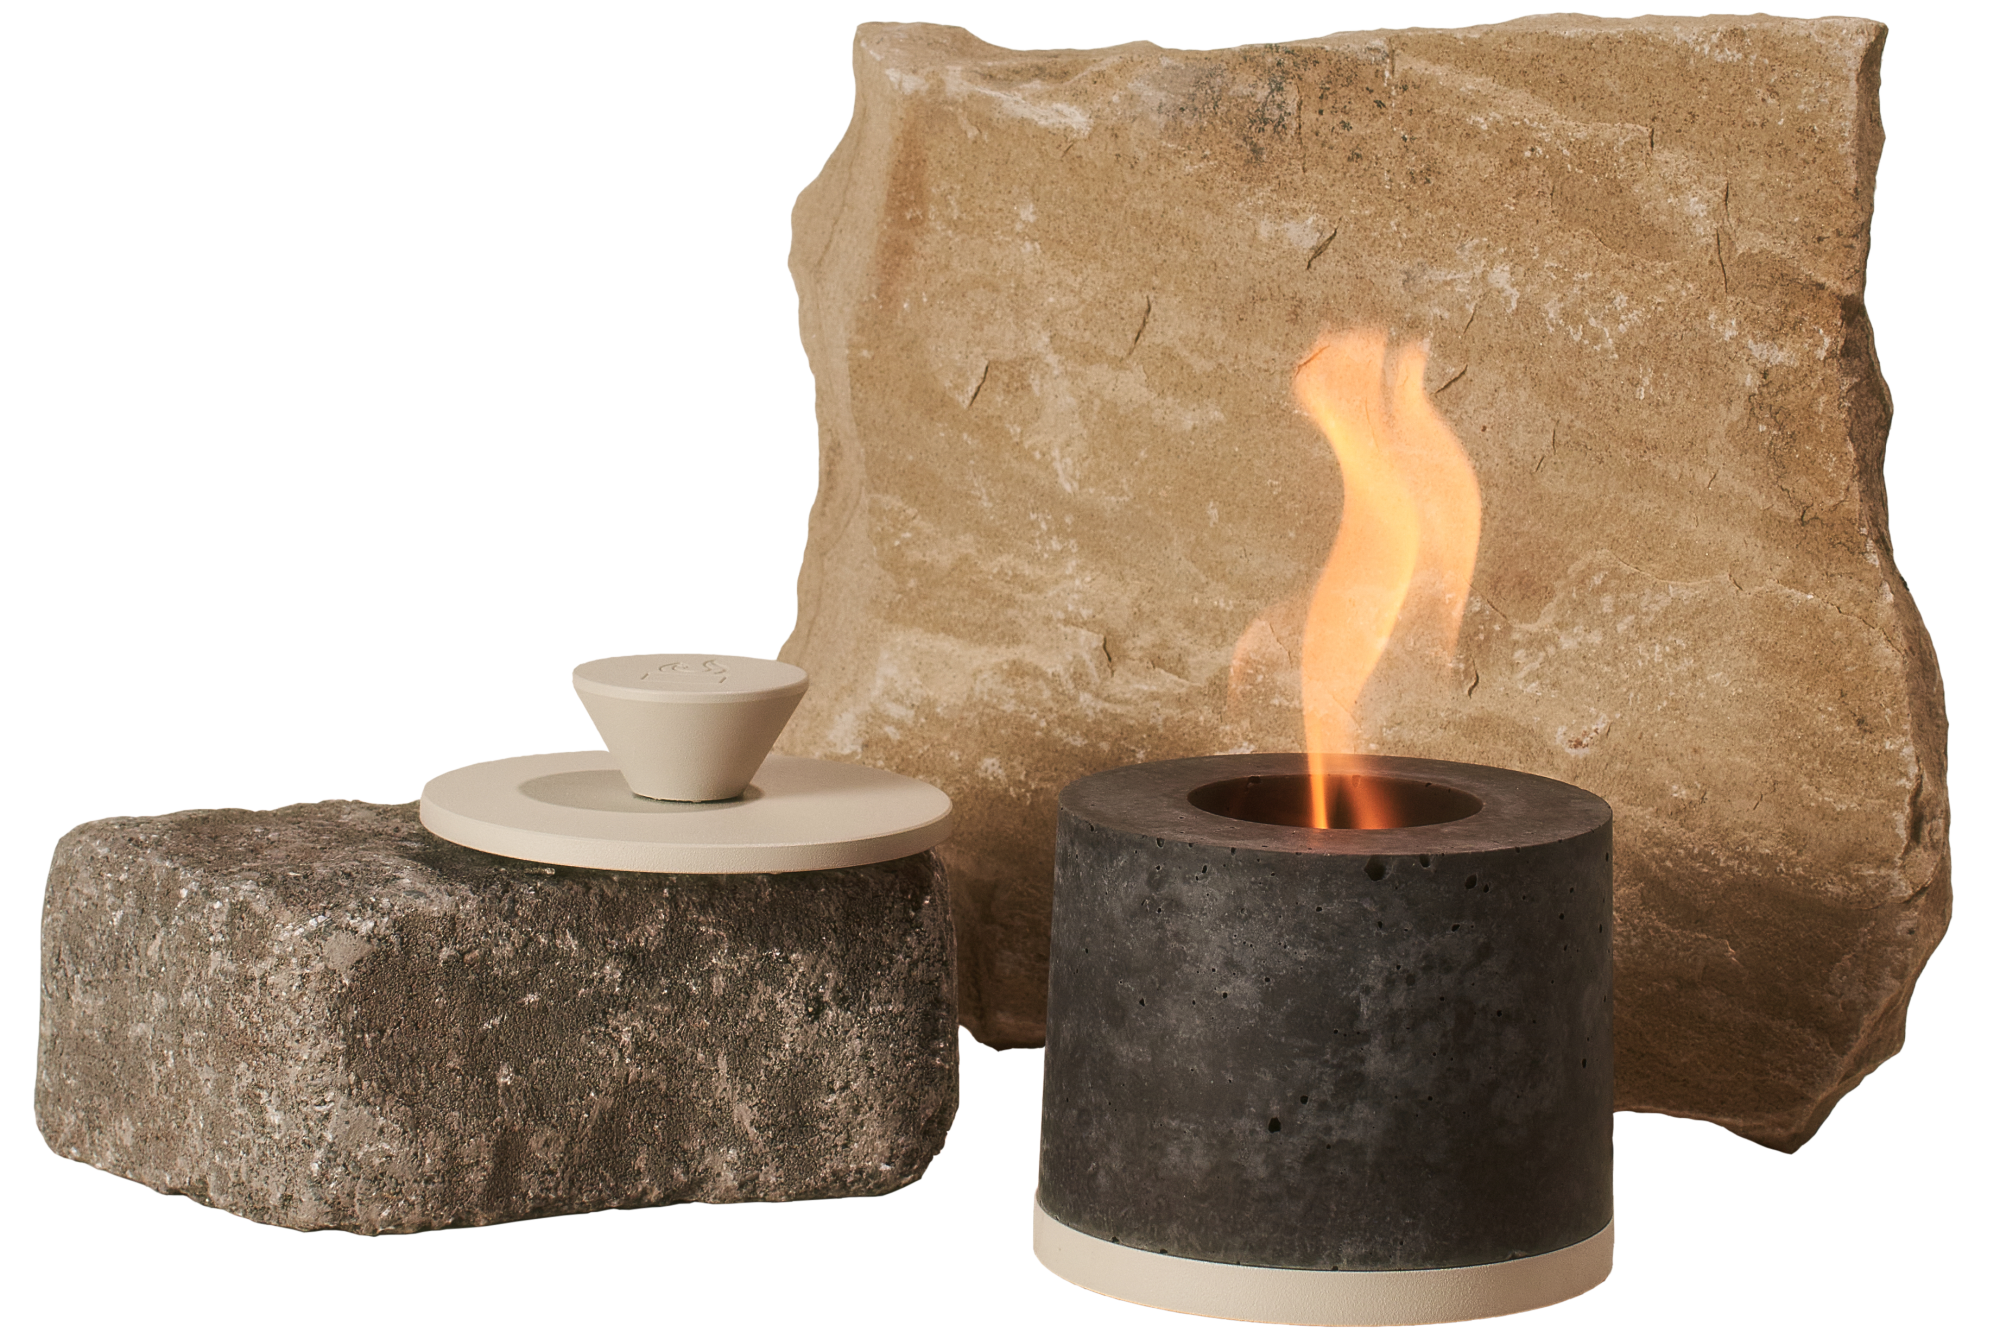 A flame rises out of the Flikr Fire mini fireplace